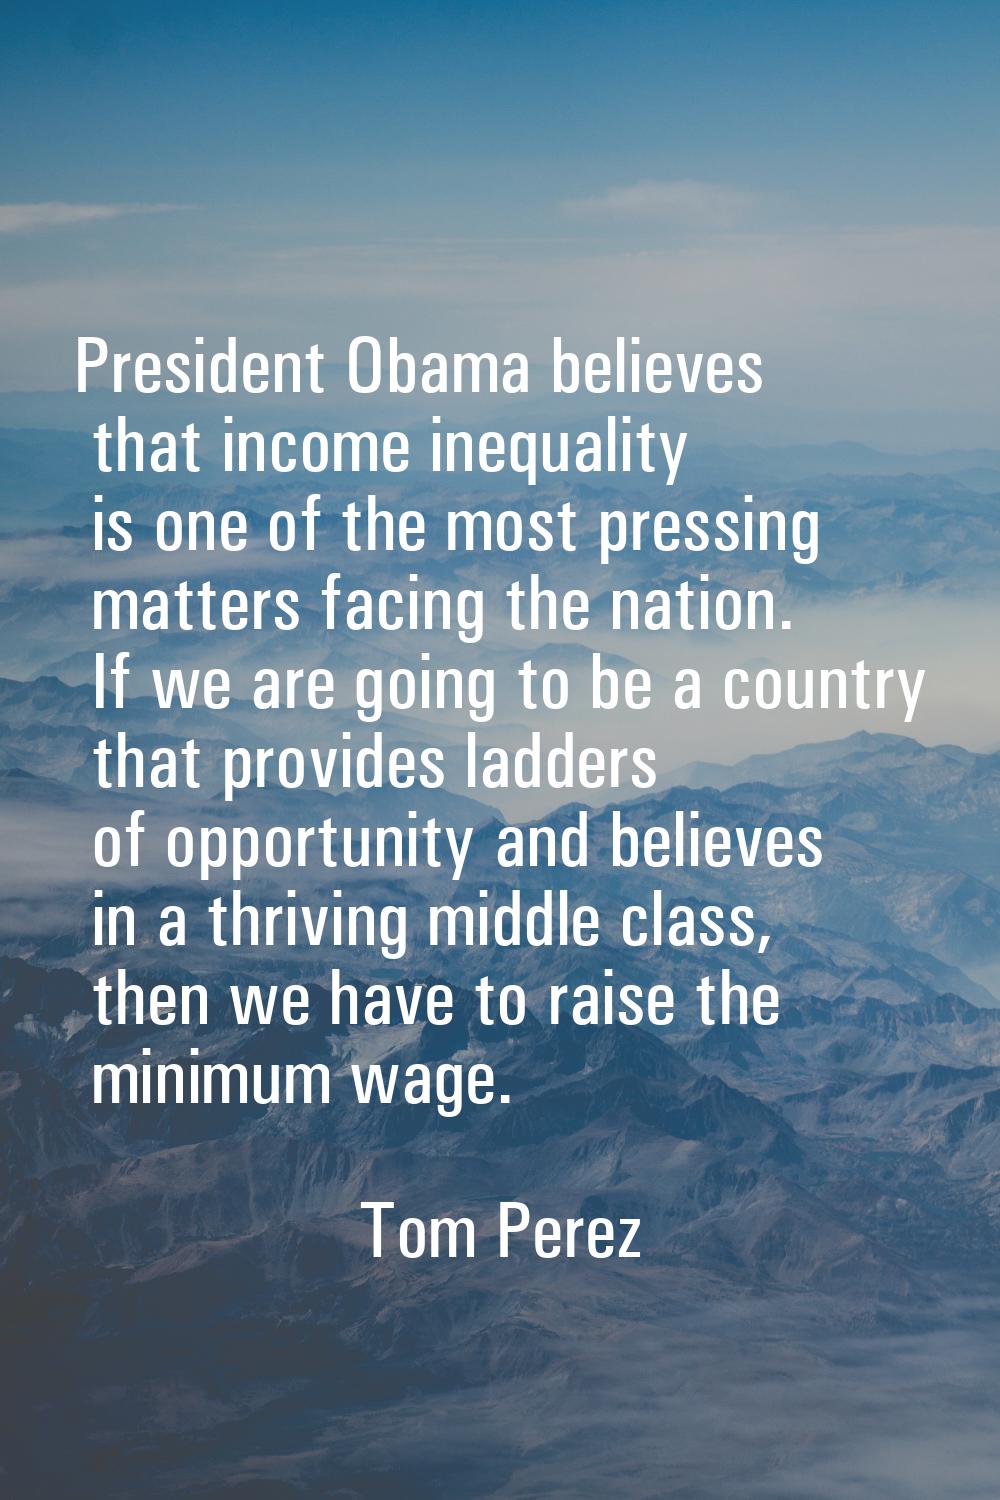 President Obama believes that income inequality is one of the most pressing matters facing the nati